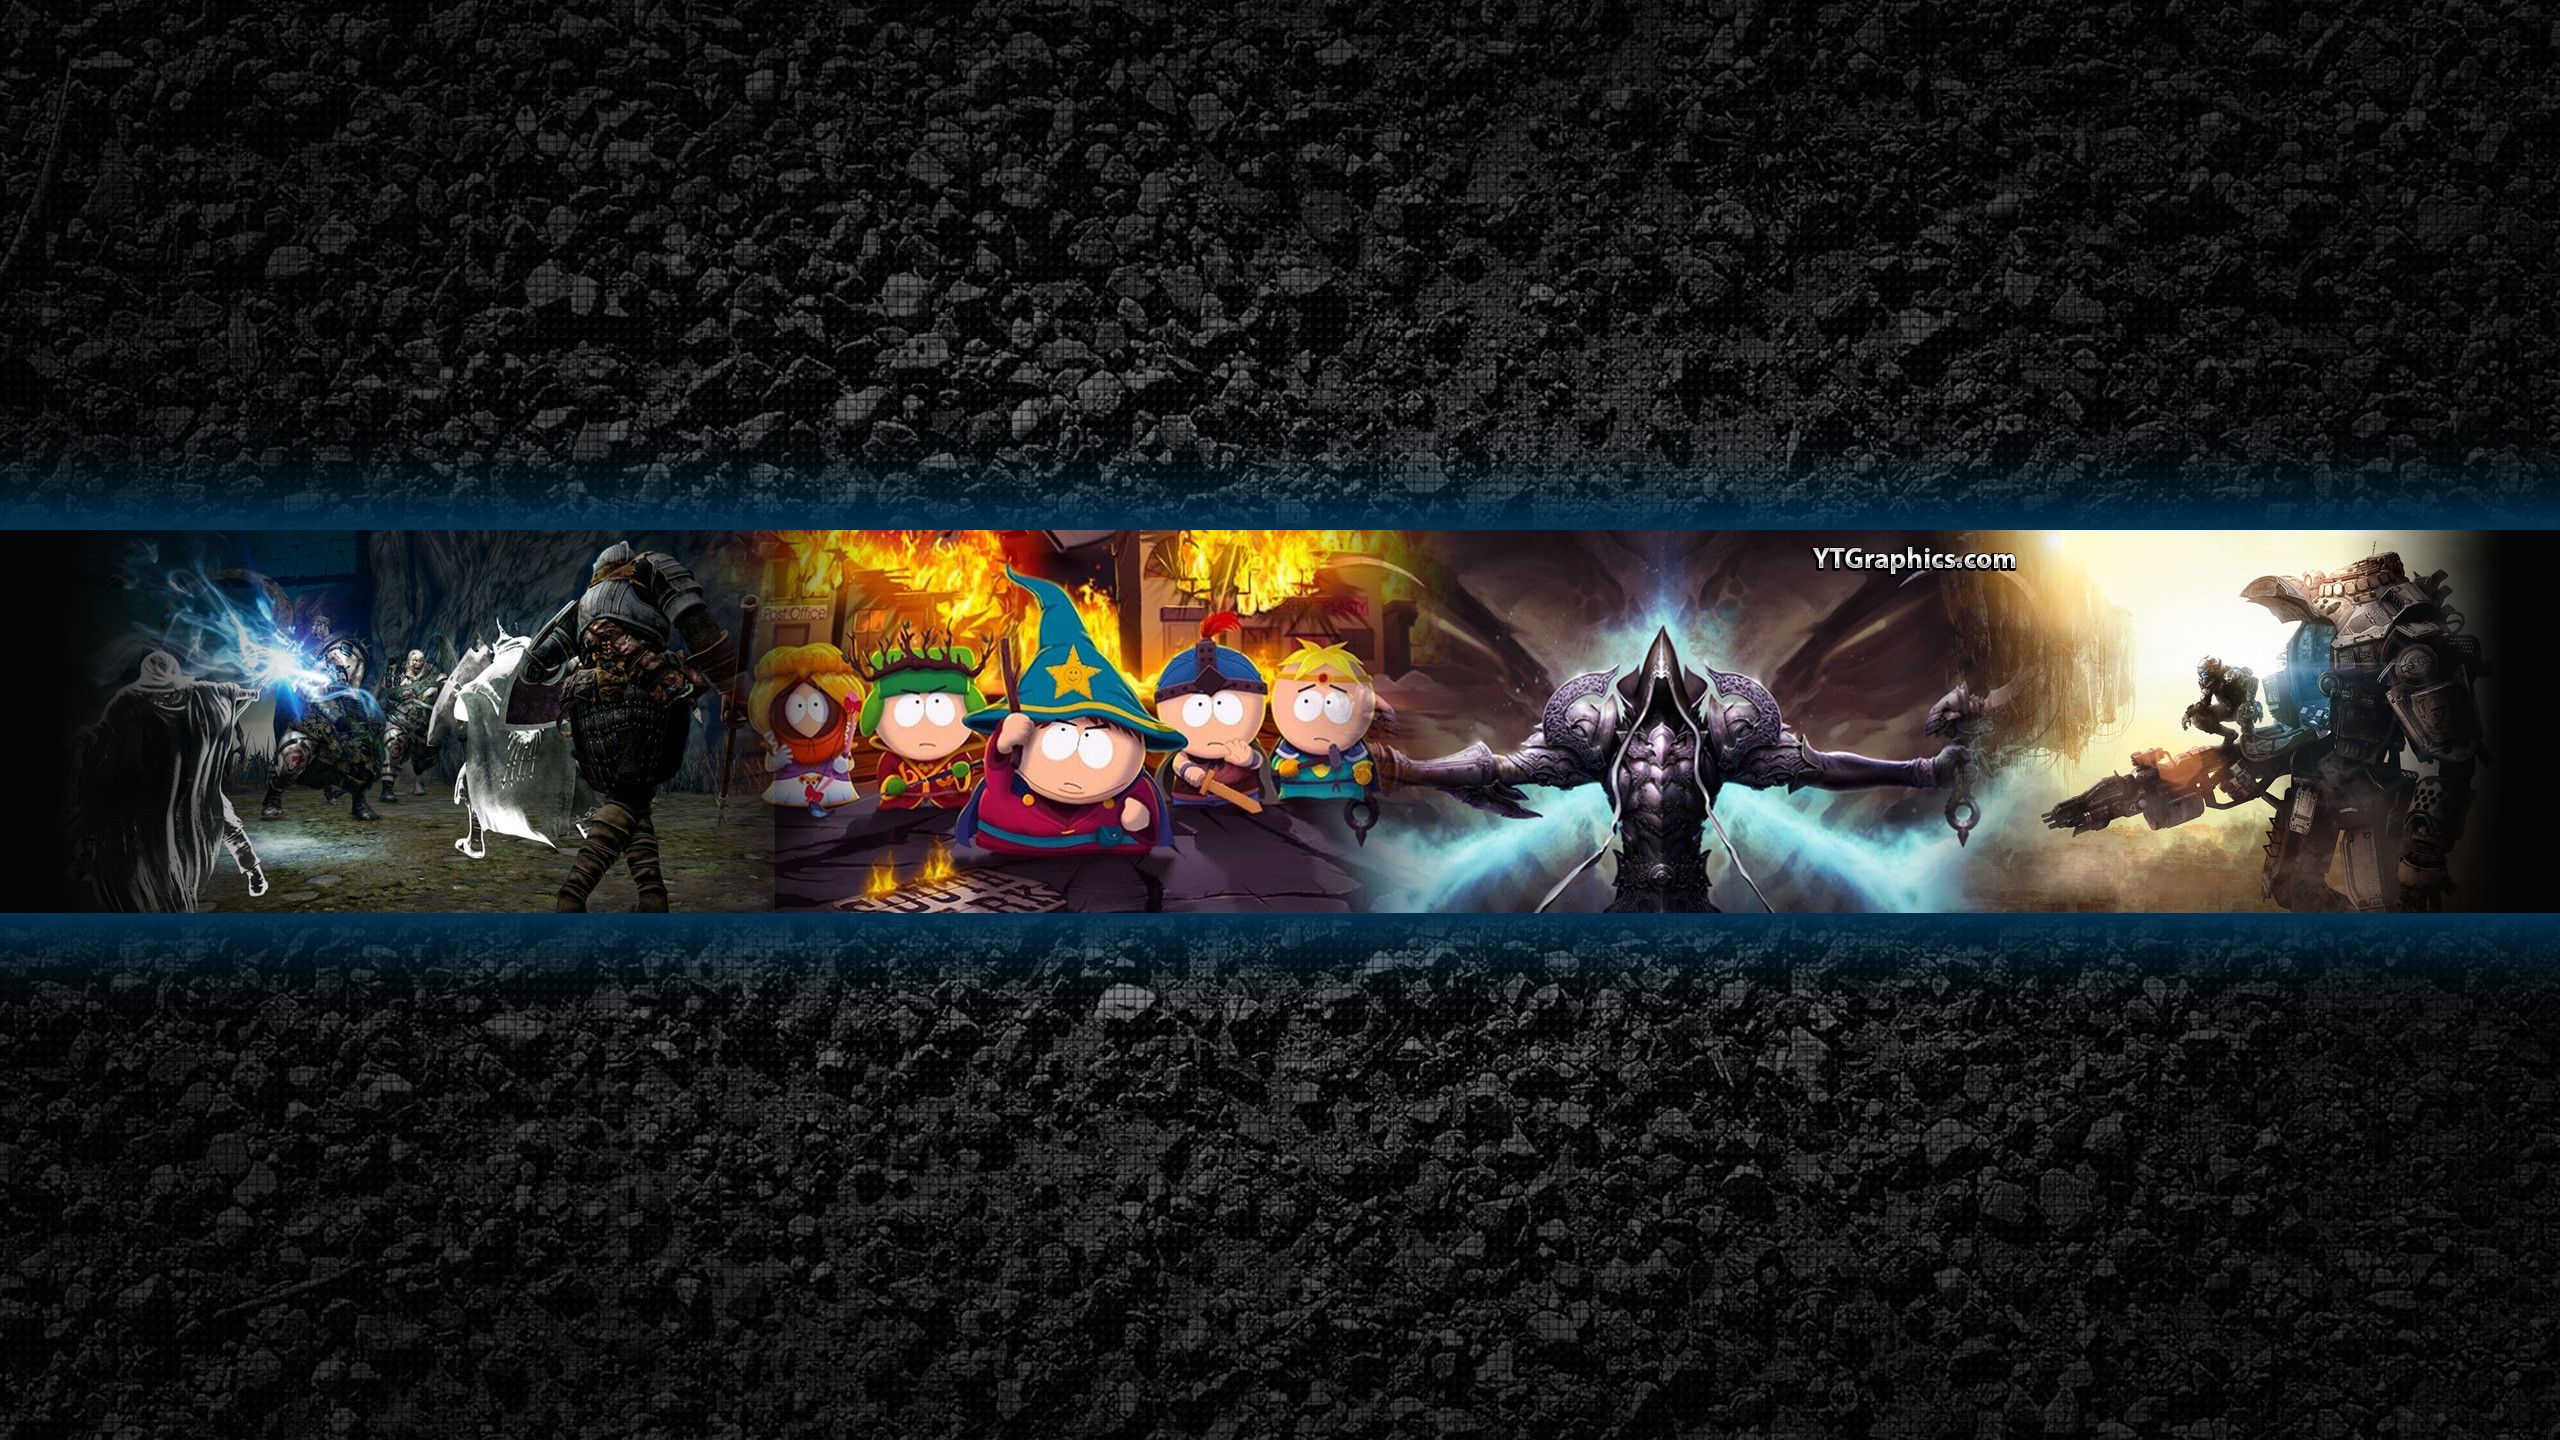 Gaming Channel Banner Wallpapers - Wallpaper Cave